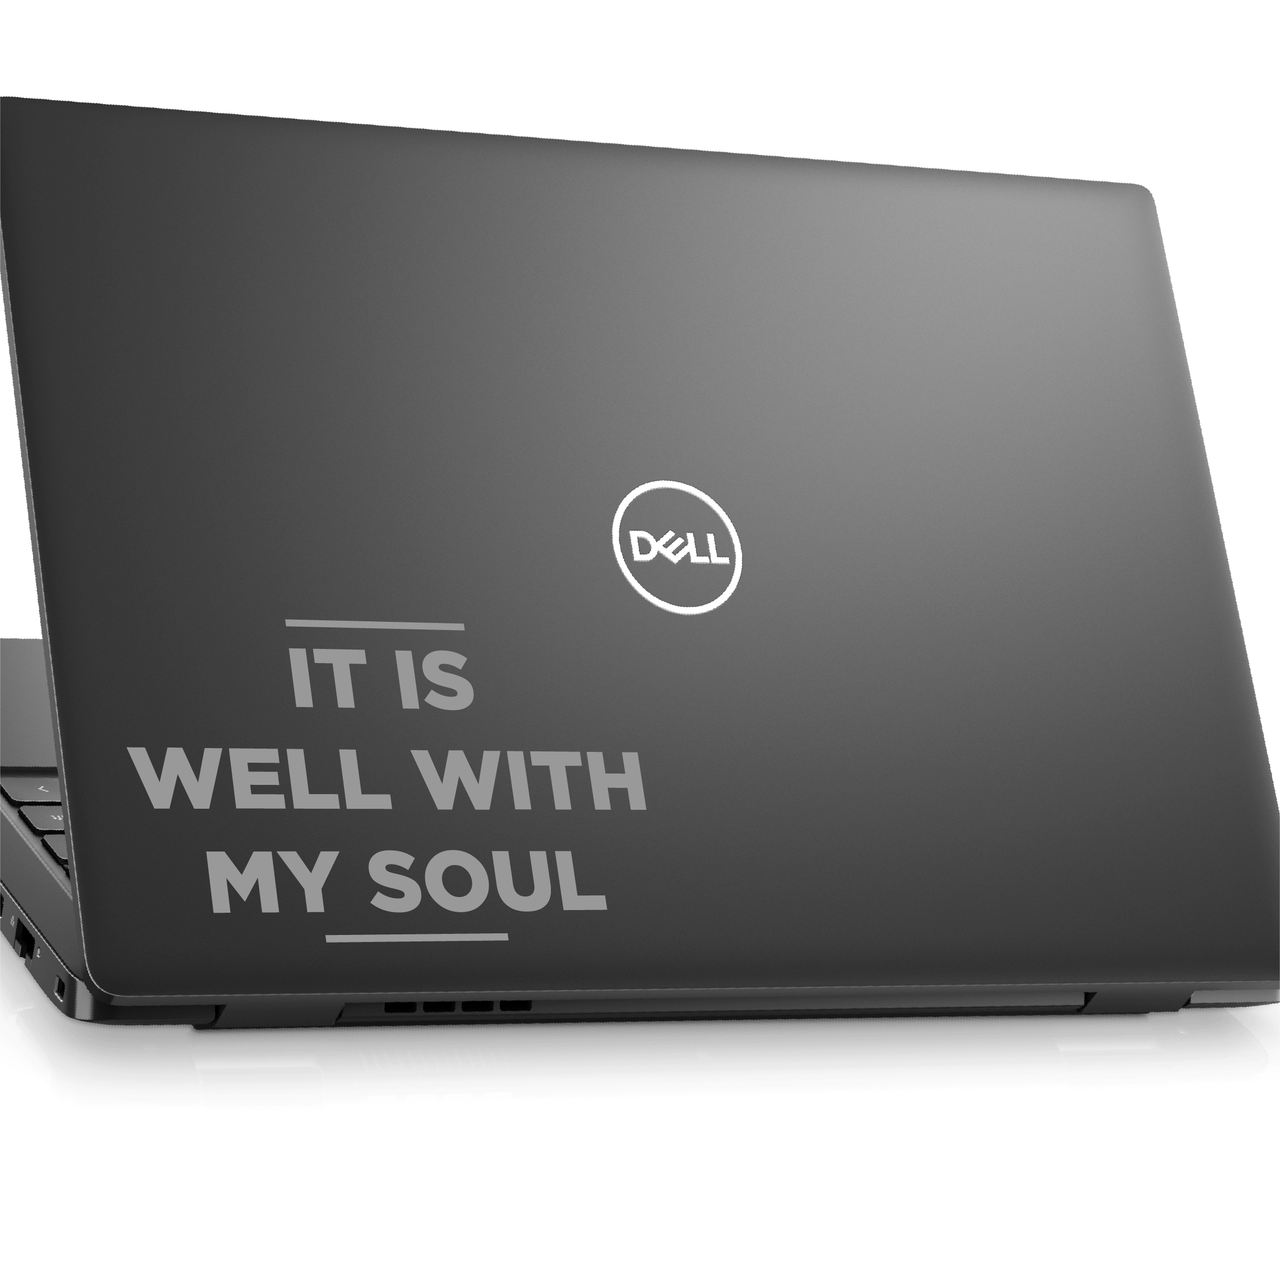 It Is Well With My Soul Laptop Decal